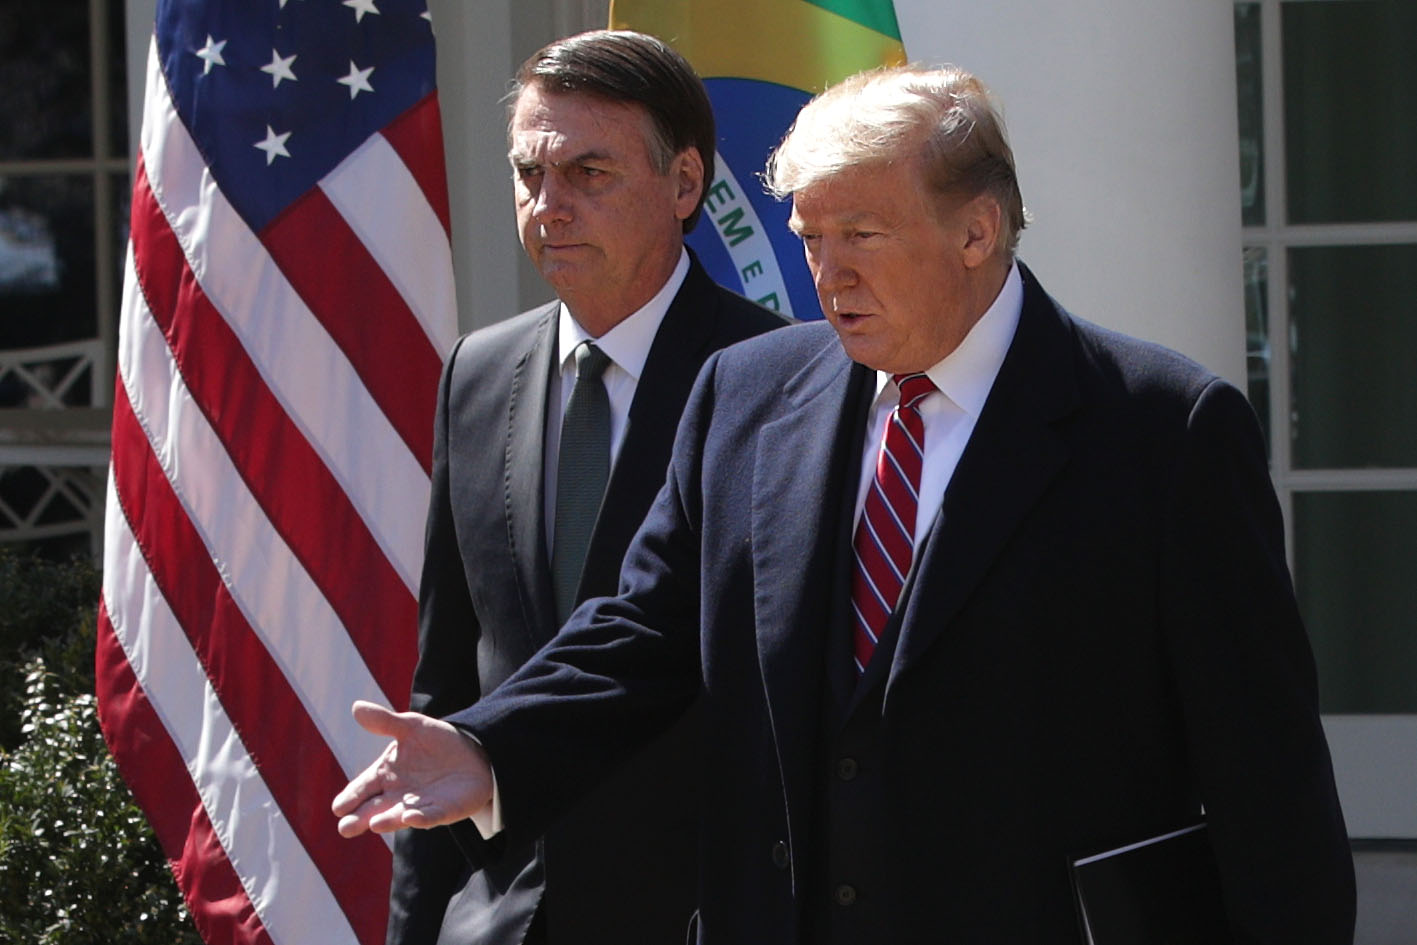 WASHINGTON, DC - MARCH 19: U.S. President Donald Trump (R) and Brazilian President Jair Bolsonaro (L) approach the podiums for a joint news conference at the Rose Garden of the White House March 19, 2019 in Washington, DC. President Trump is hosting President Bolsonaro for a visit and bilateral talks at the White House today. (Photo by Alex Wong/Getty Images)